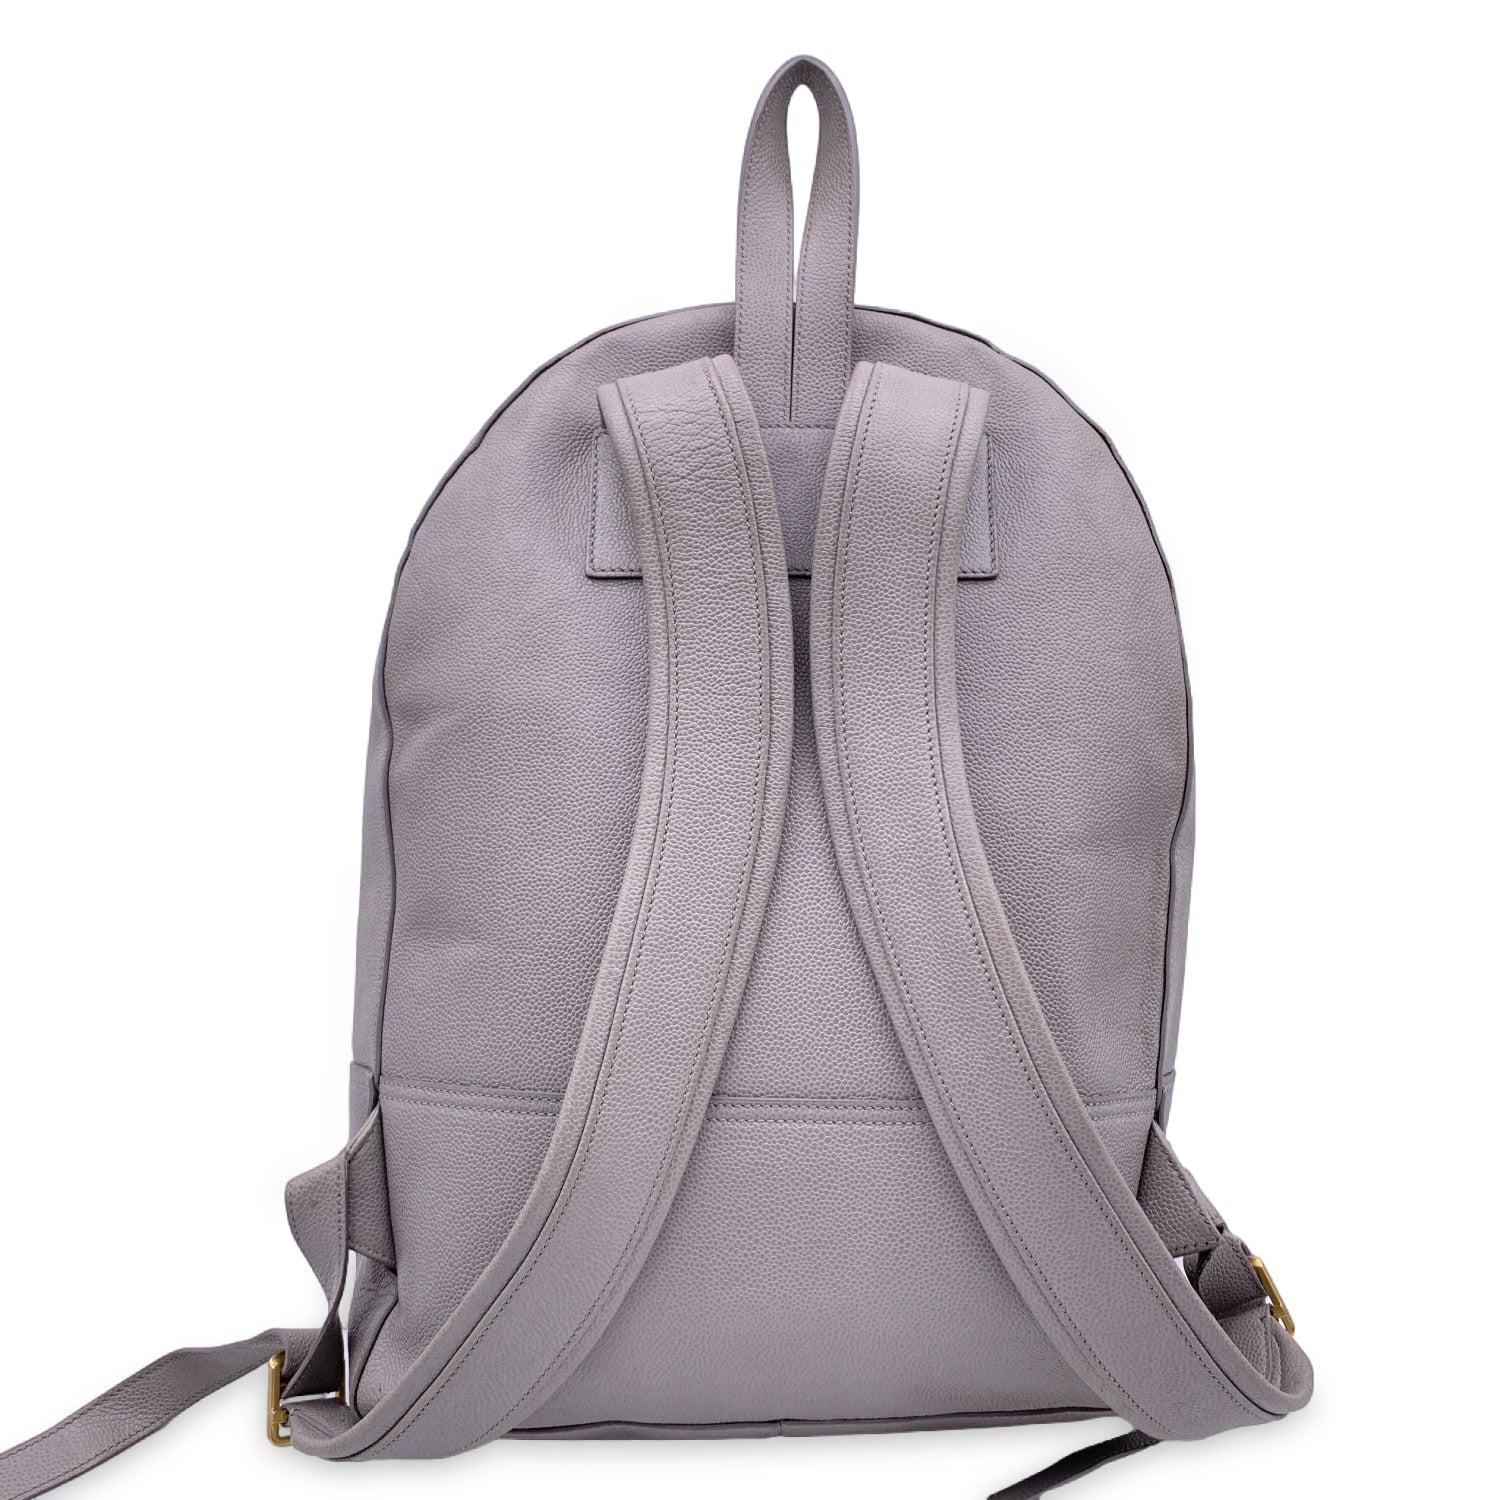 Gray Thom Browne Grey Pebble Grain Leather Classic Backpack Bag For Sale